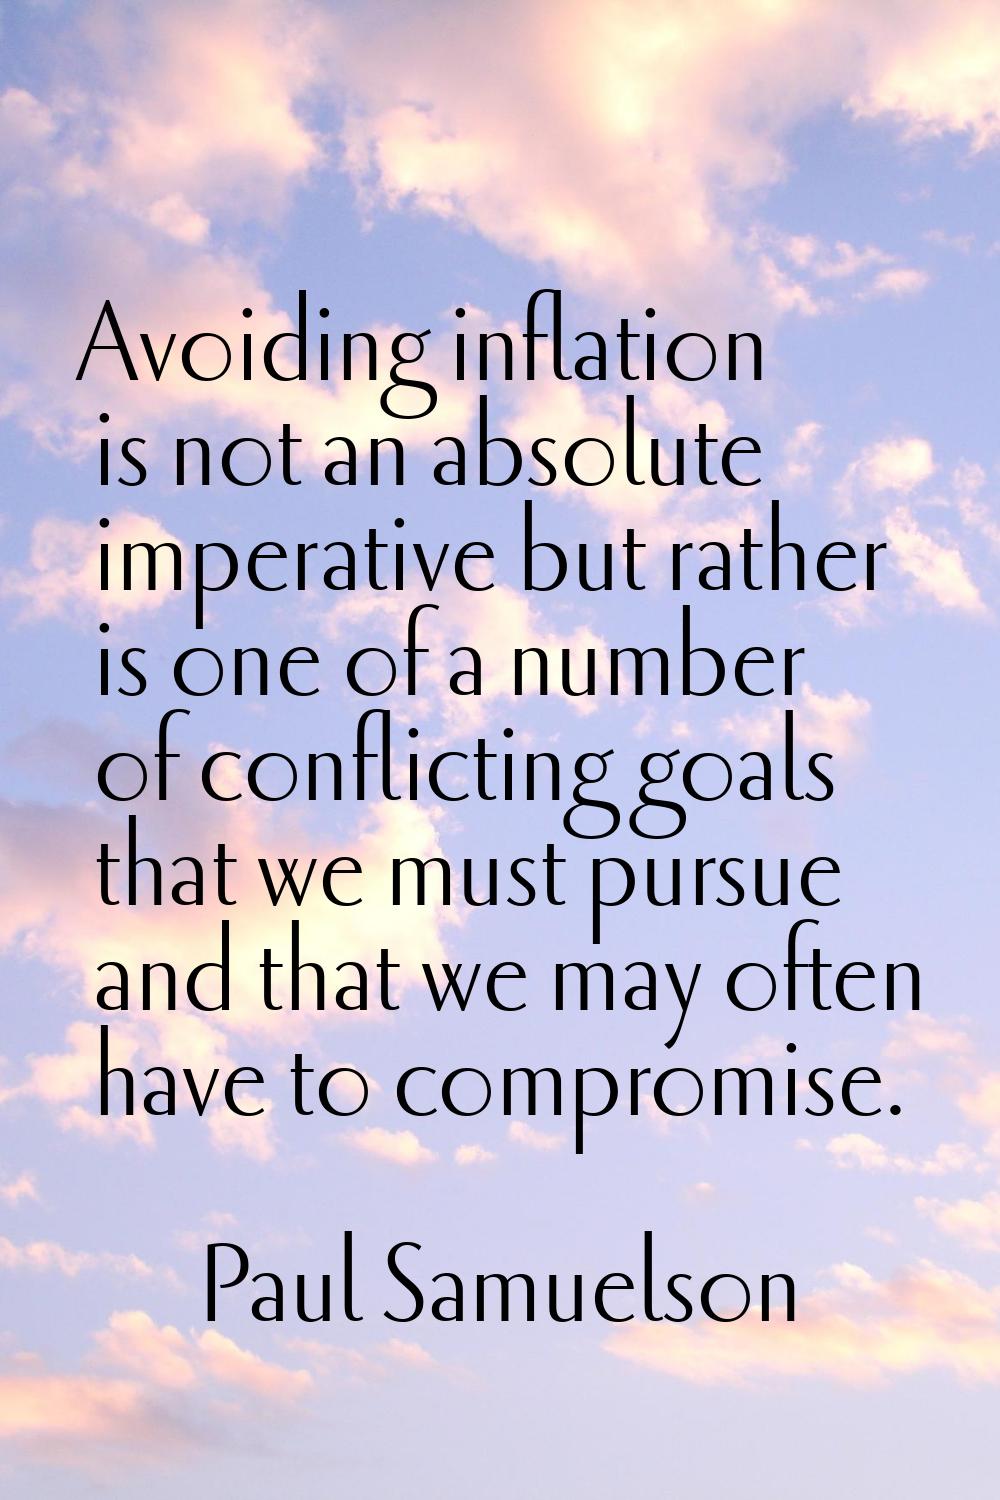 Avoiding inflation is not an absolute imperative but rather is one of a number of conflicting goals